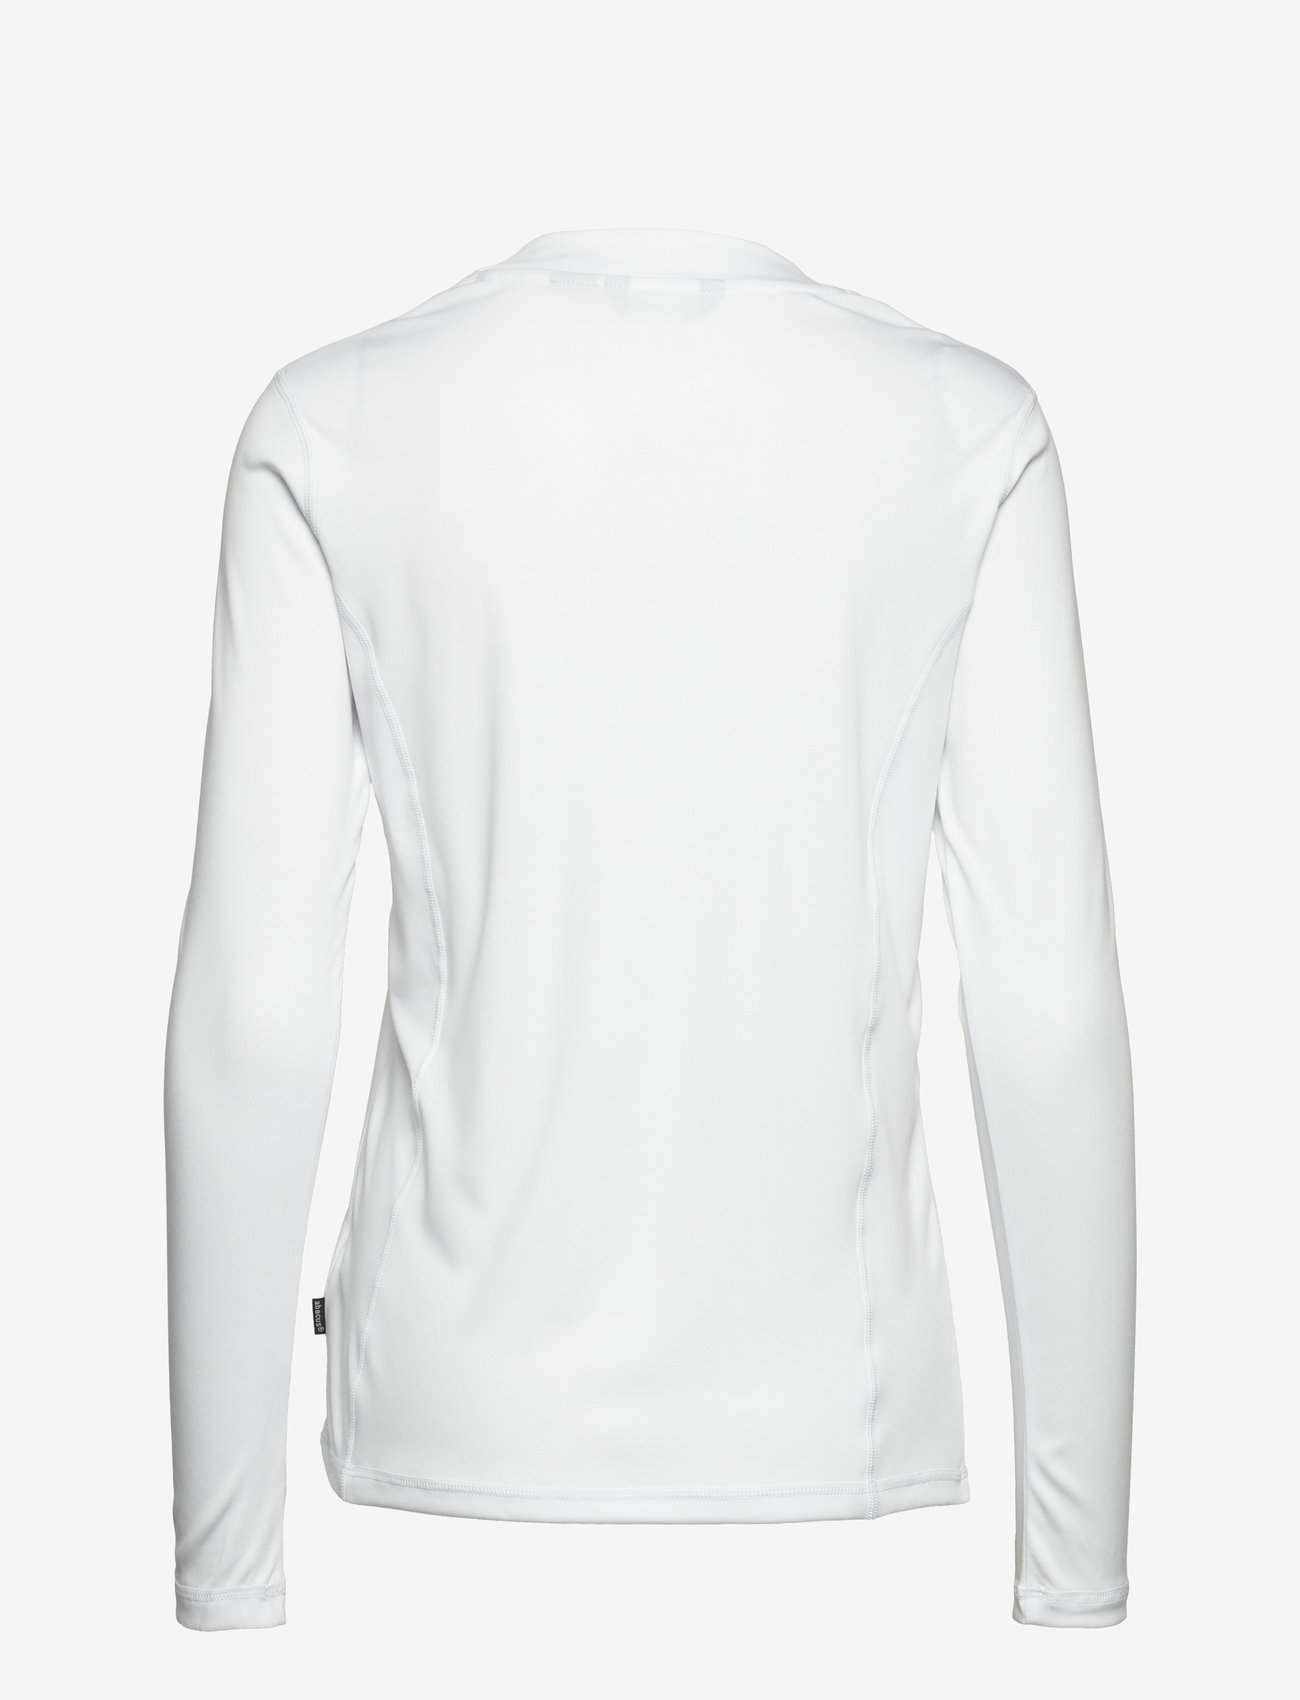 Abacus - Lds Spin longsleeve - langermede topper - white - 1